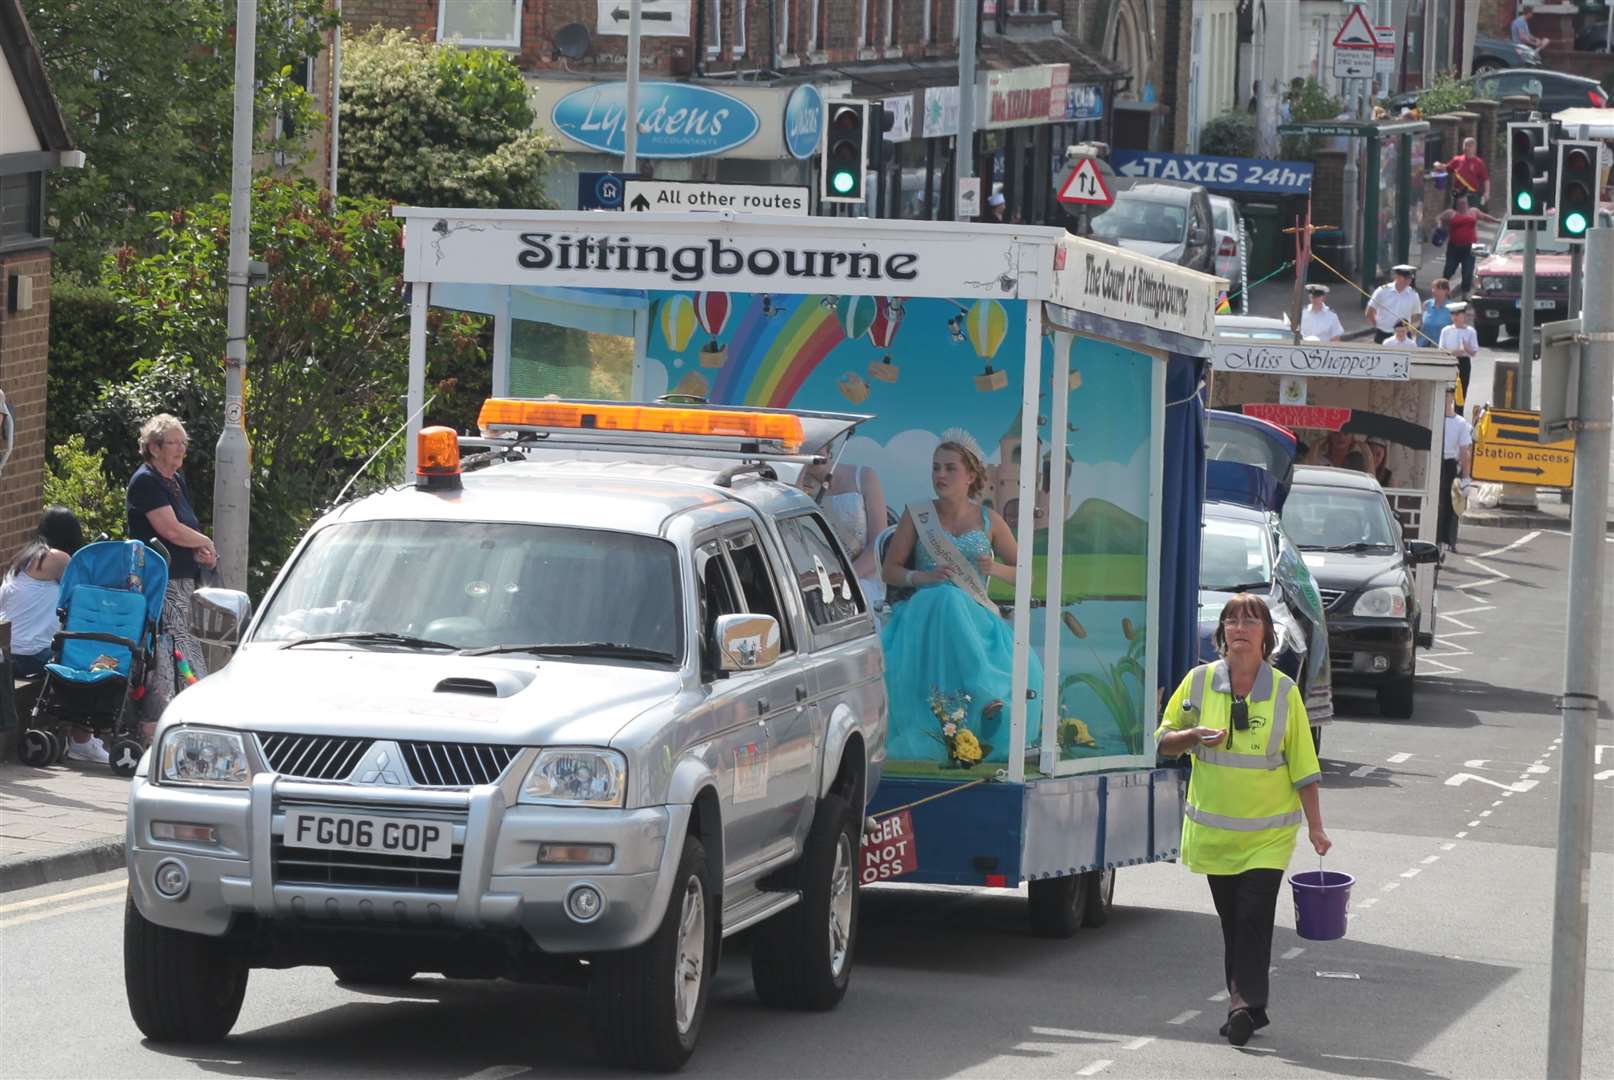 Flashback... the Sittingbourne Carnival Court float during a previous event